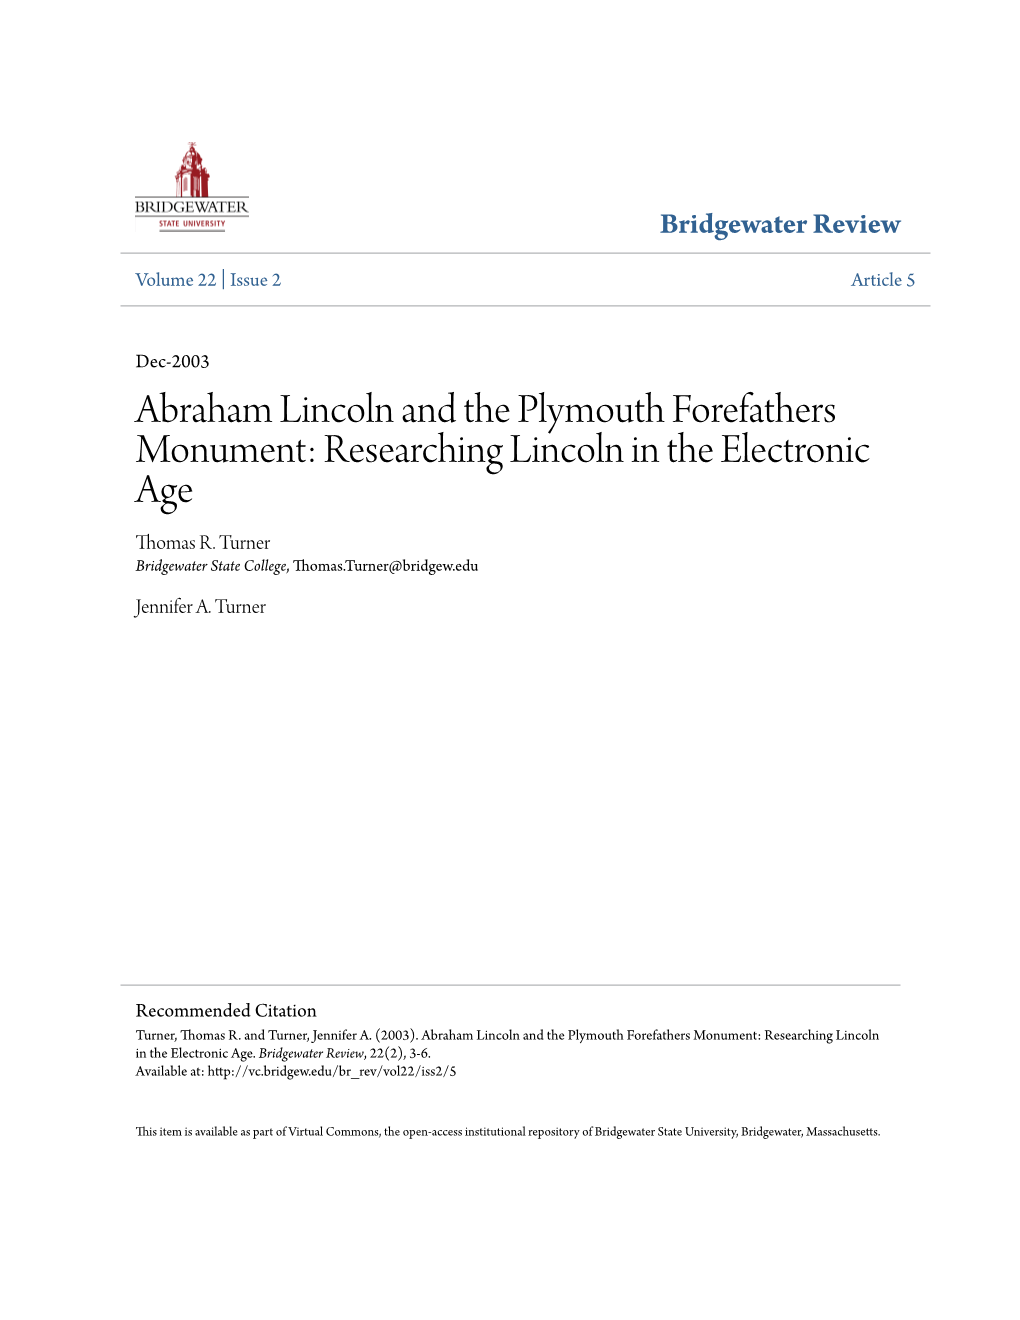 Abraham Lincoln and the Plymouth Forefathers Monument: Researching Lincoln in the Electronic Age Thomas R